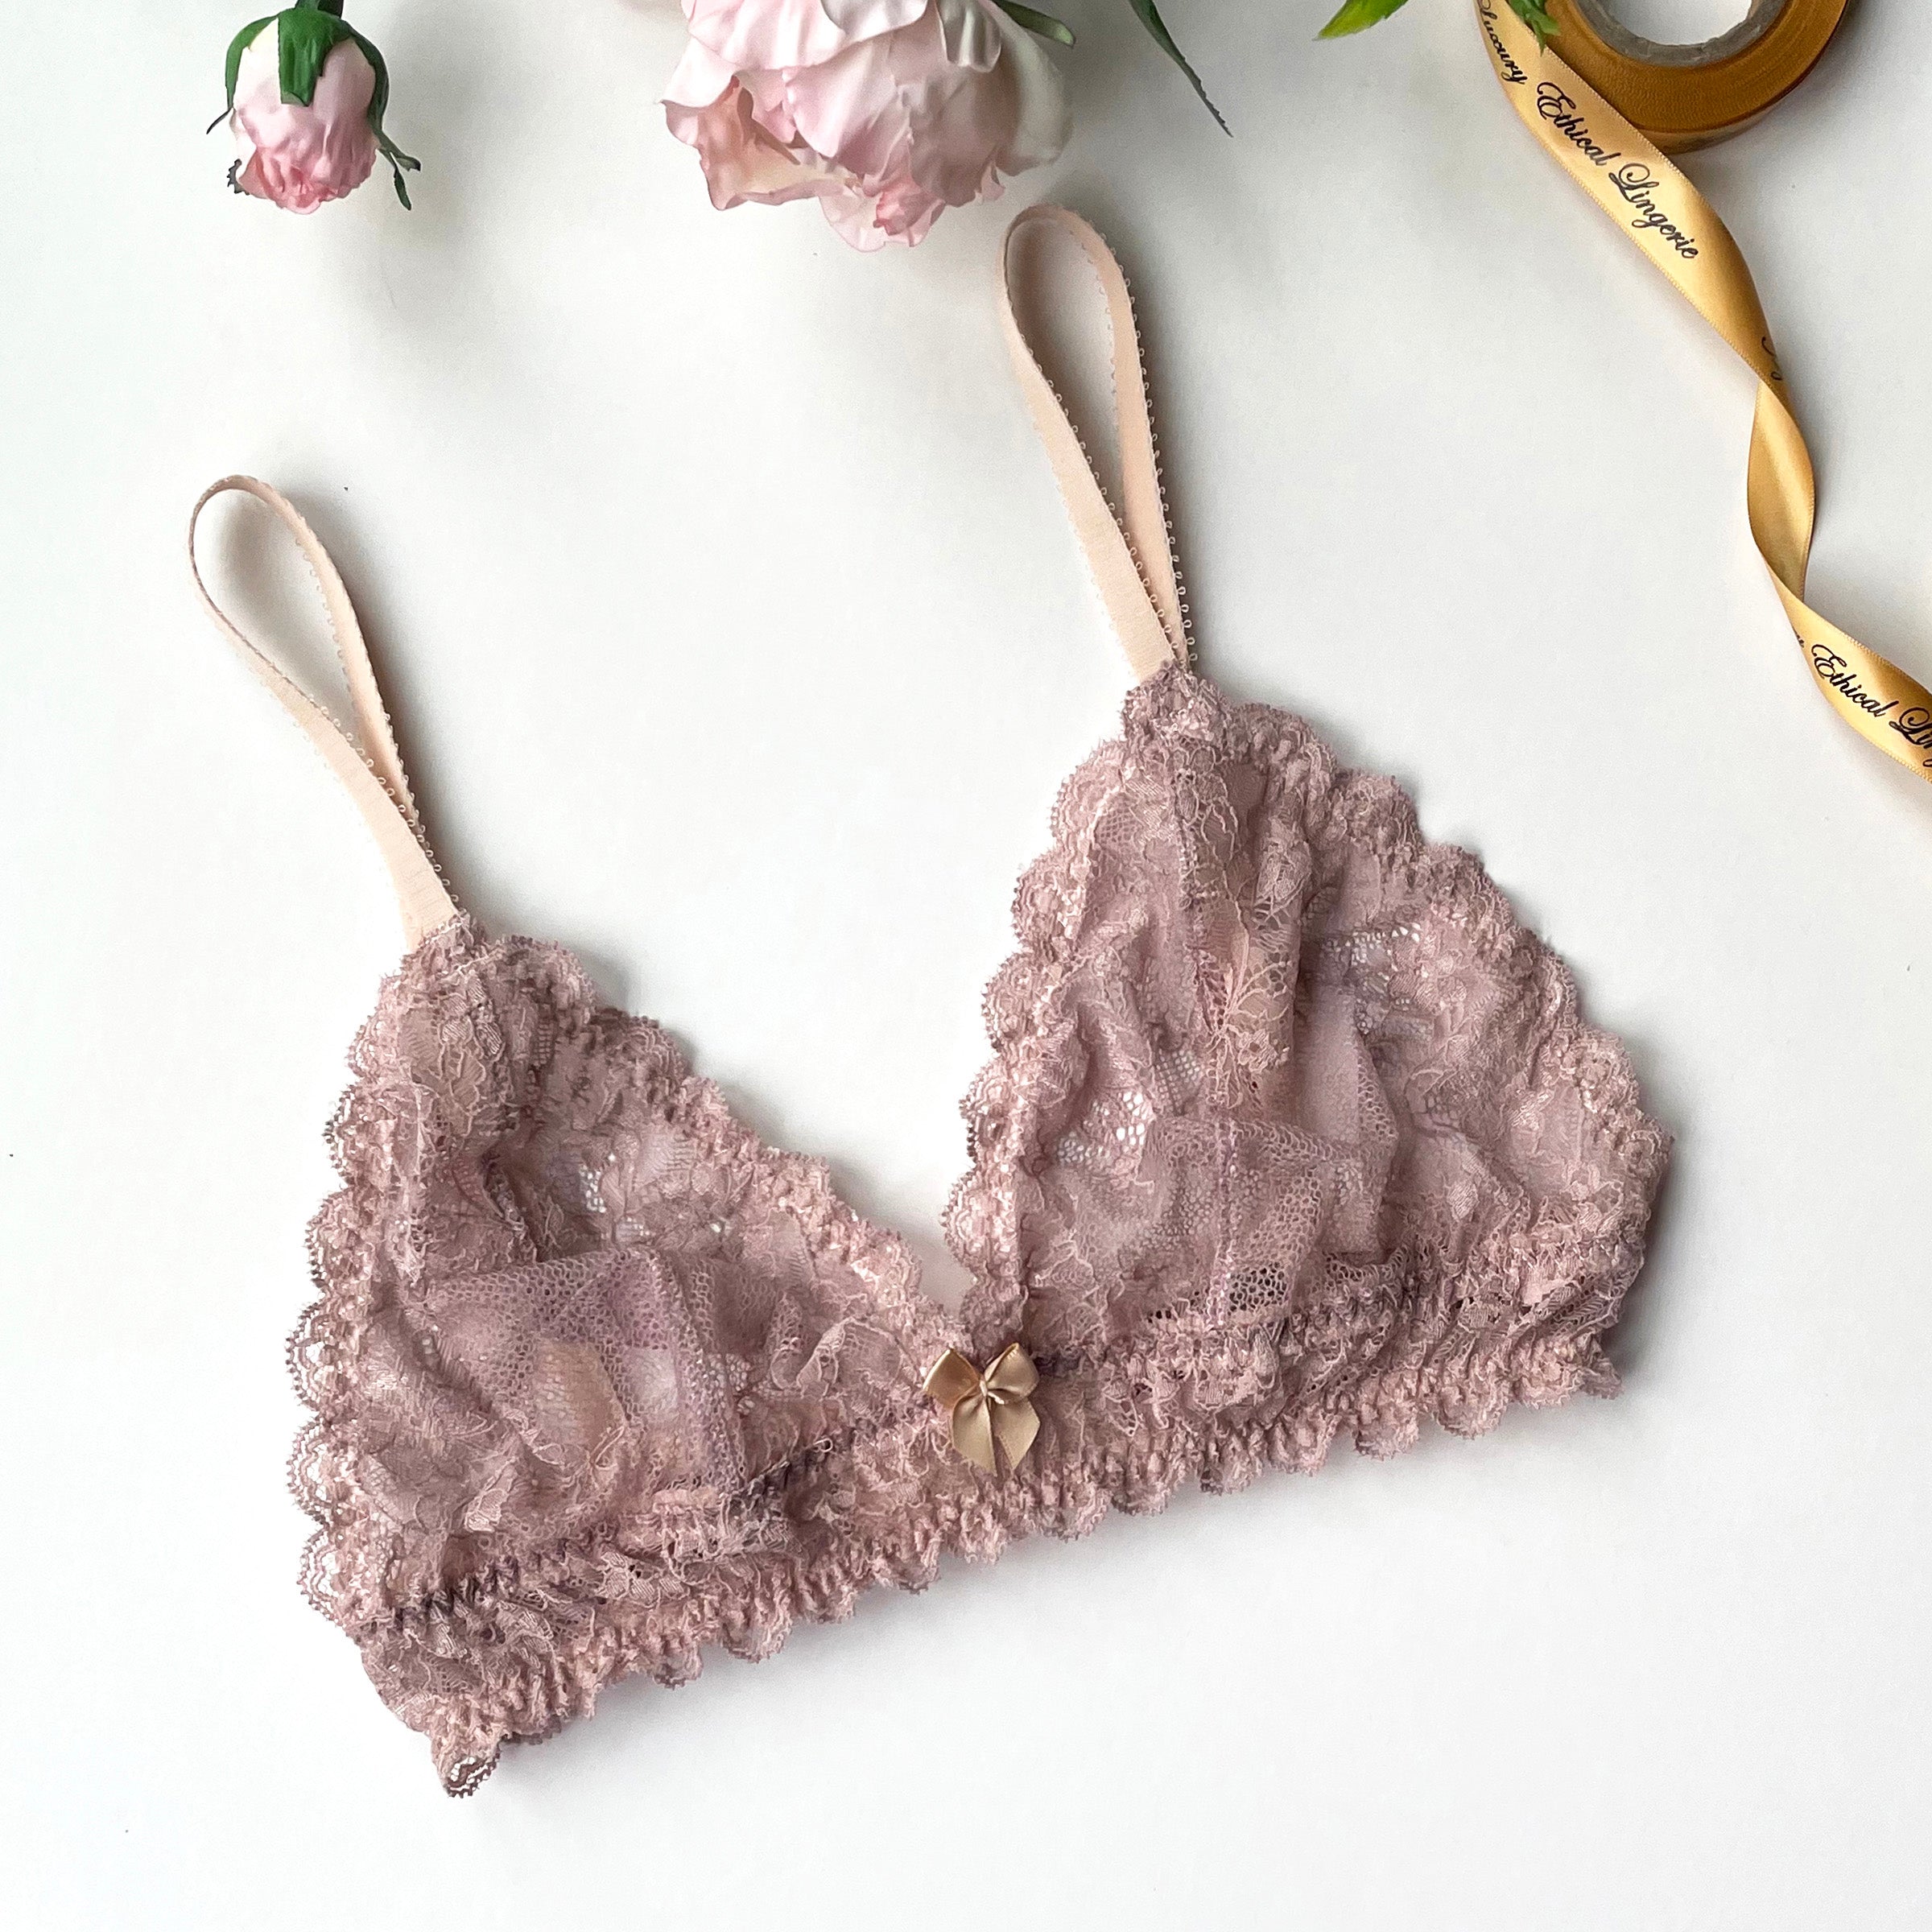 The History of Bras: From Corsets to Modern Designs, by Hsia Lingerie